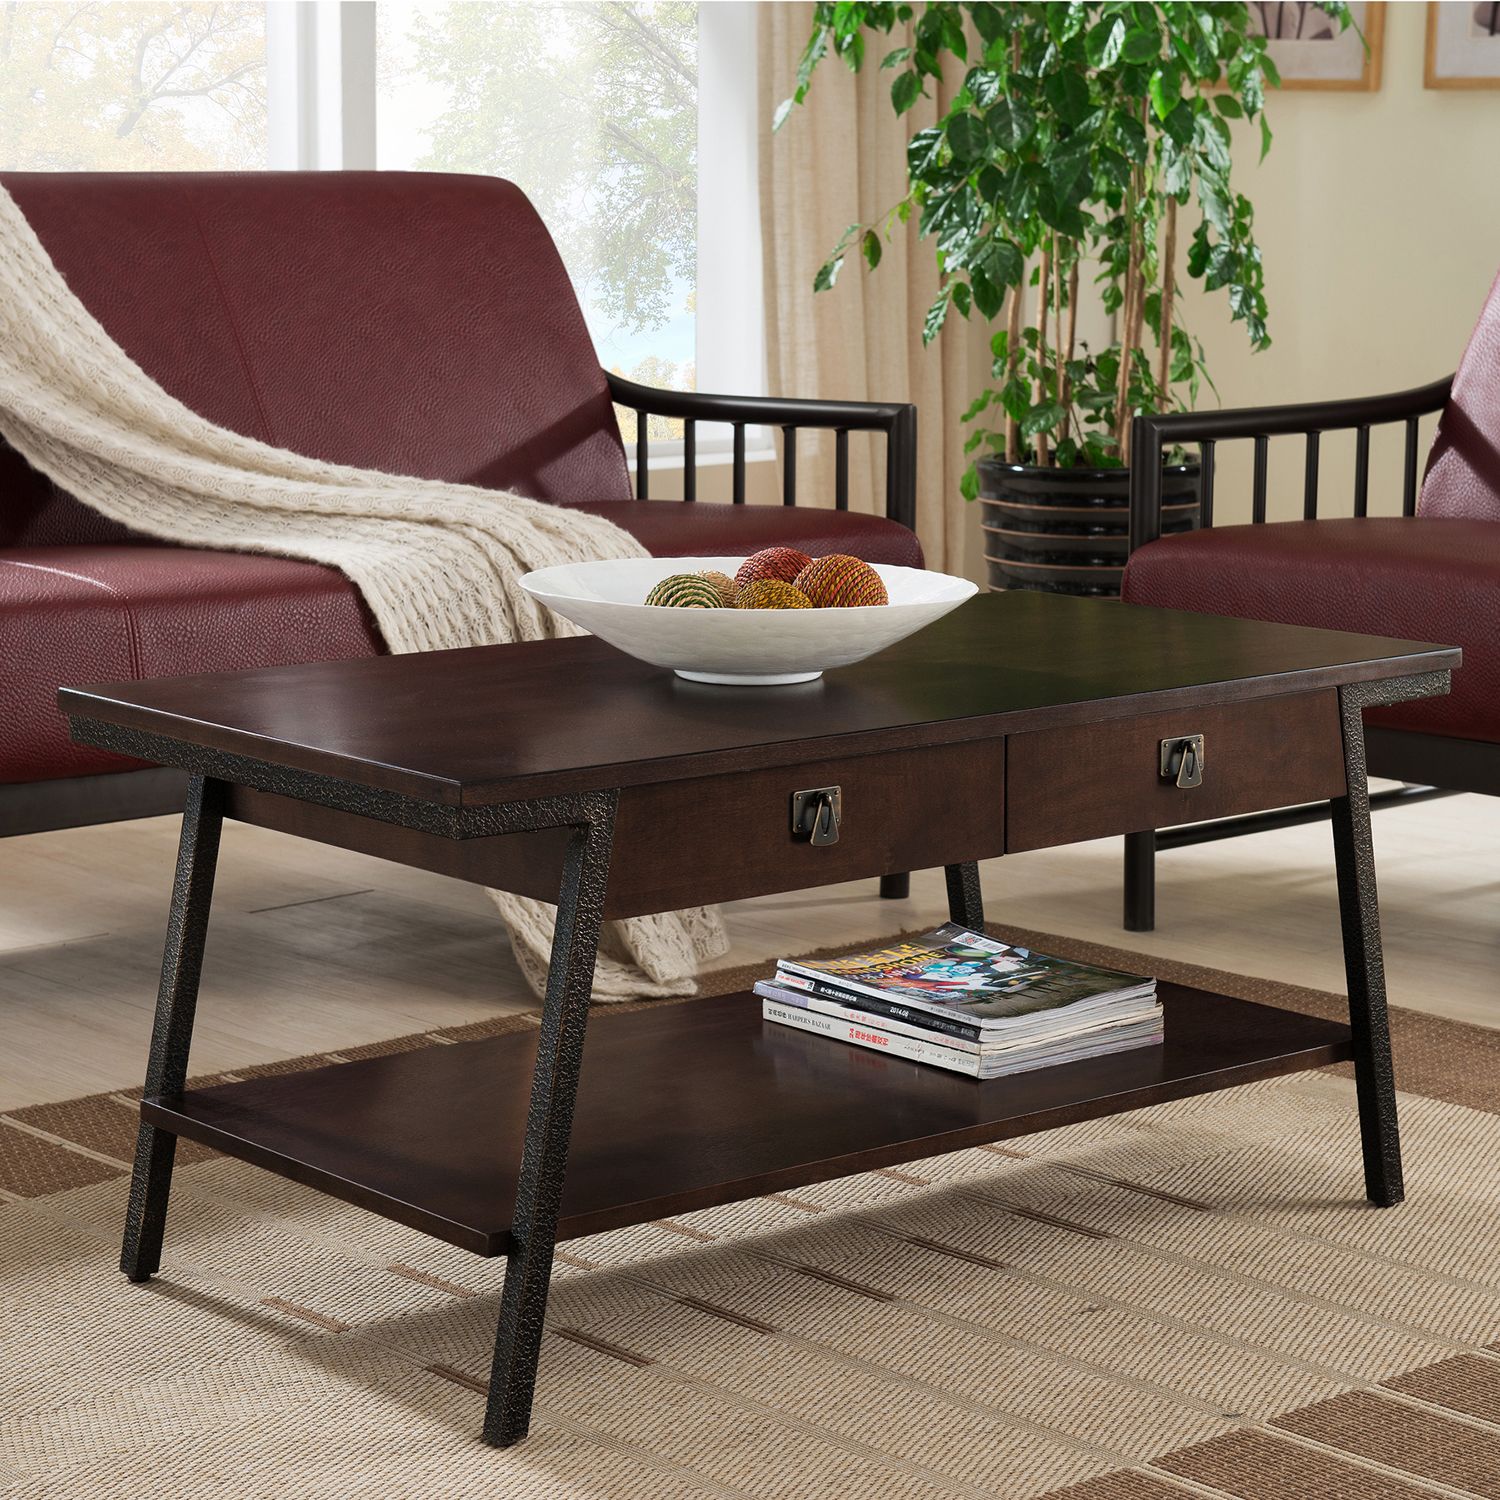 Image for Leick Furniture 2-Drawer Walnut Finish Coffee Table at Kohl's.